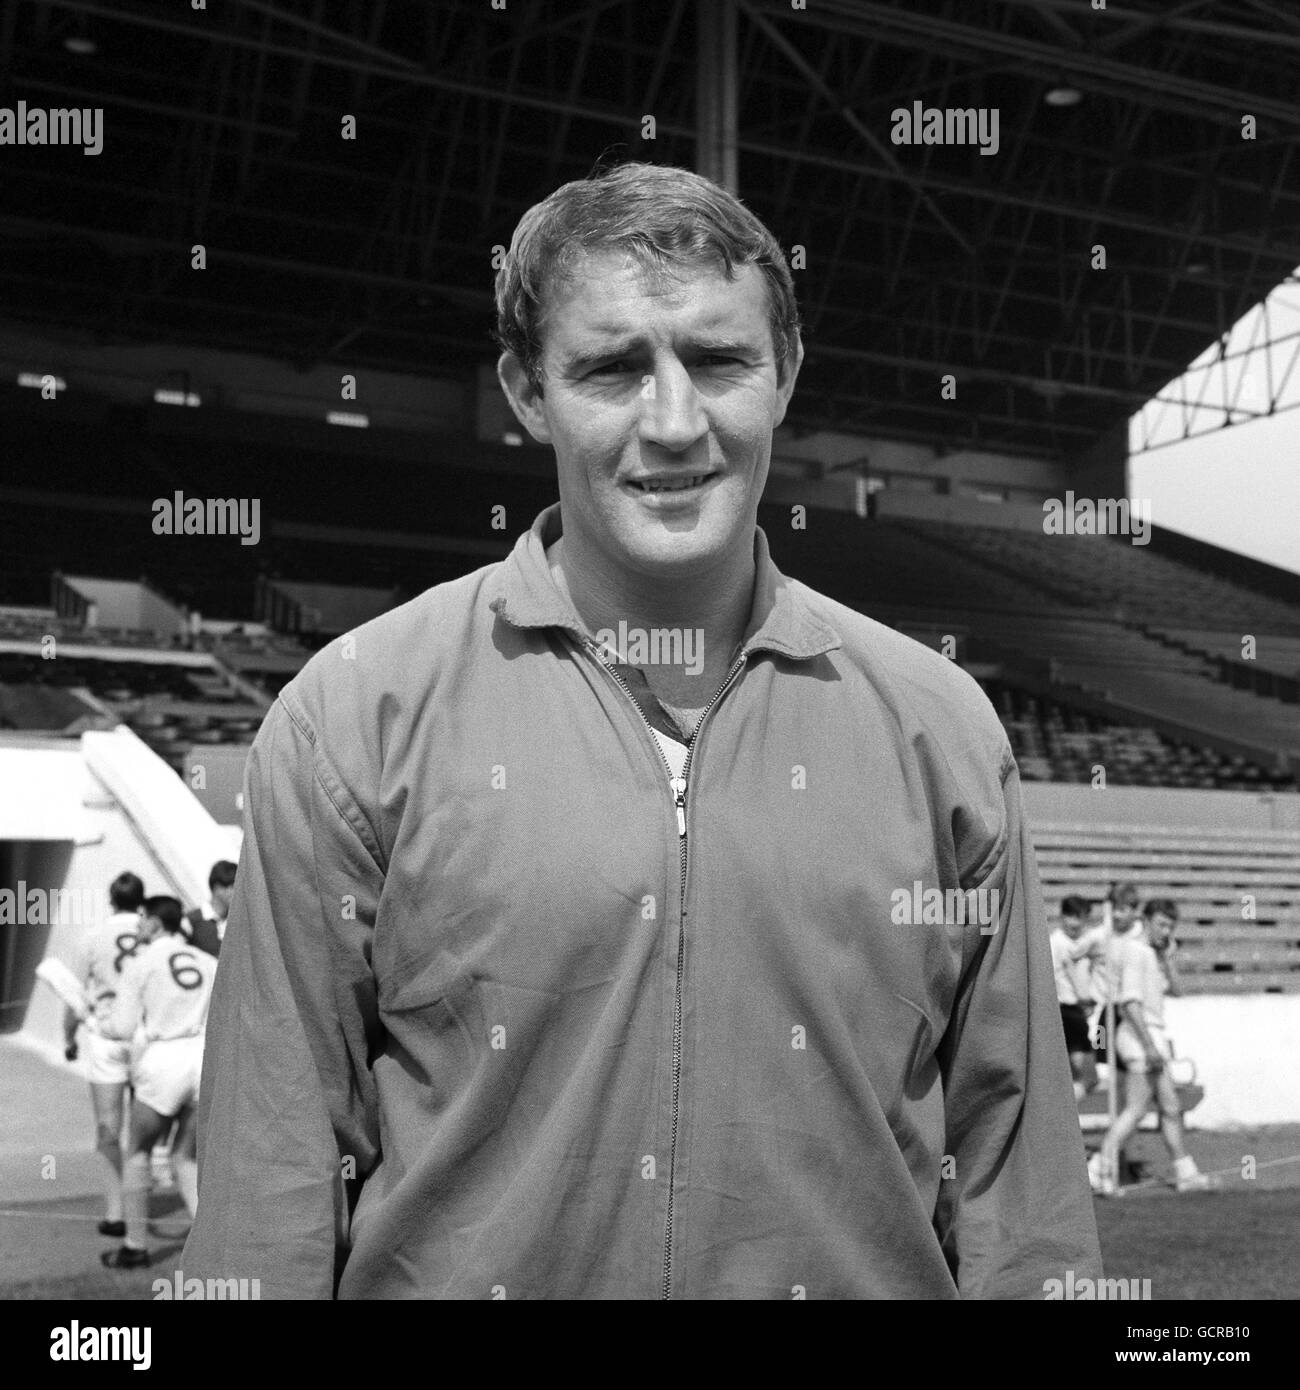 Soccer - League Division Two - Manchester City - Maine Road, Manchester. Malcolm Allison, the assistant manager of Manchester City. Stock Photo